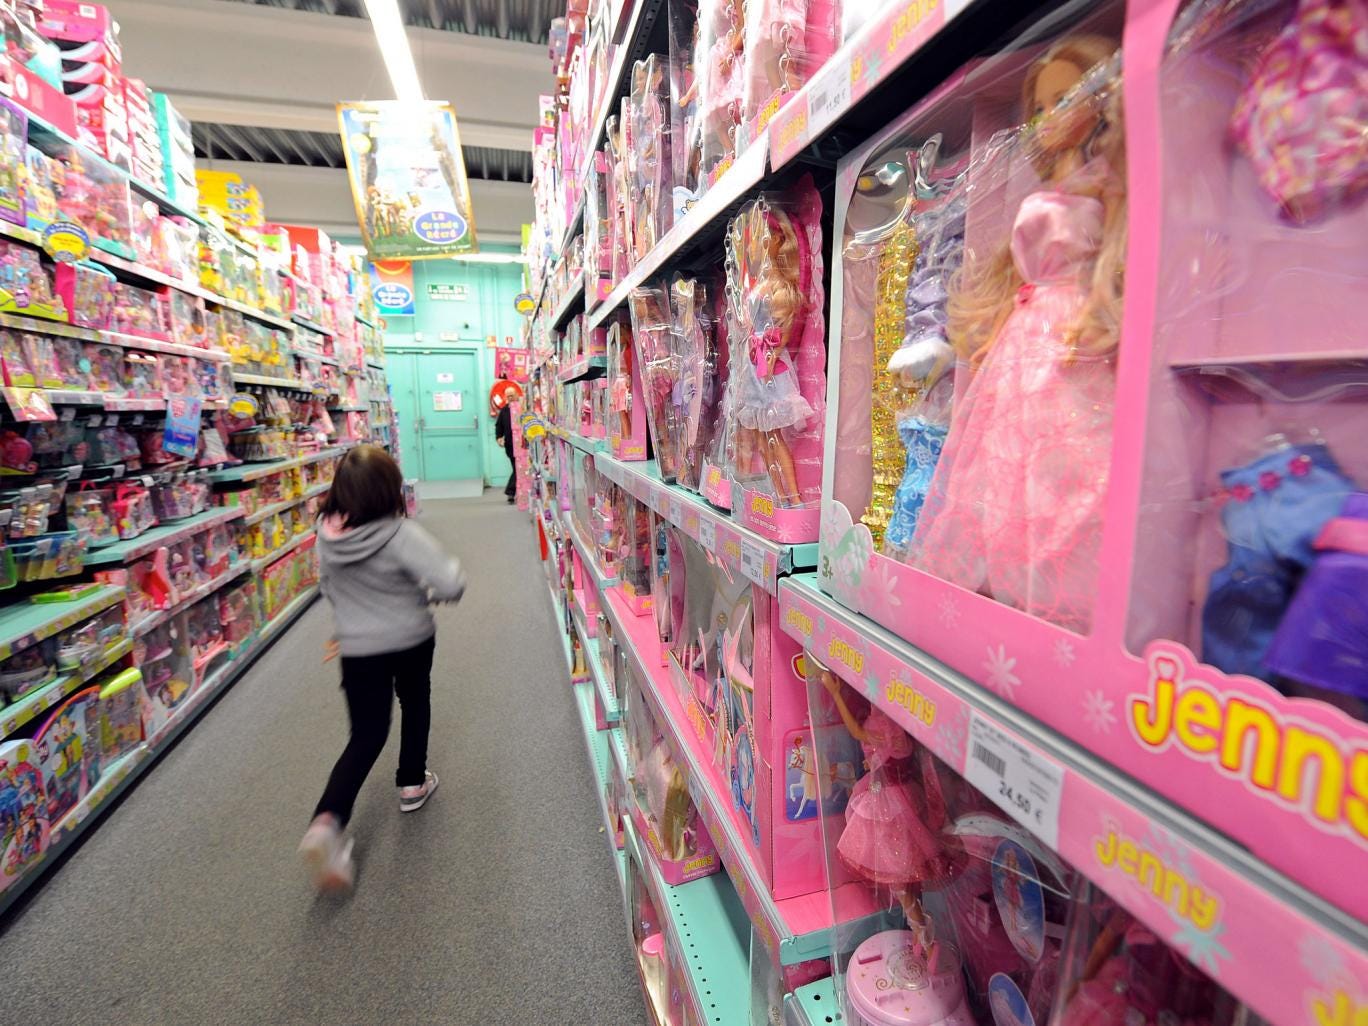 Most Toy Adverts Are Sexist And Show Narrow And Limiting Gender